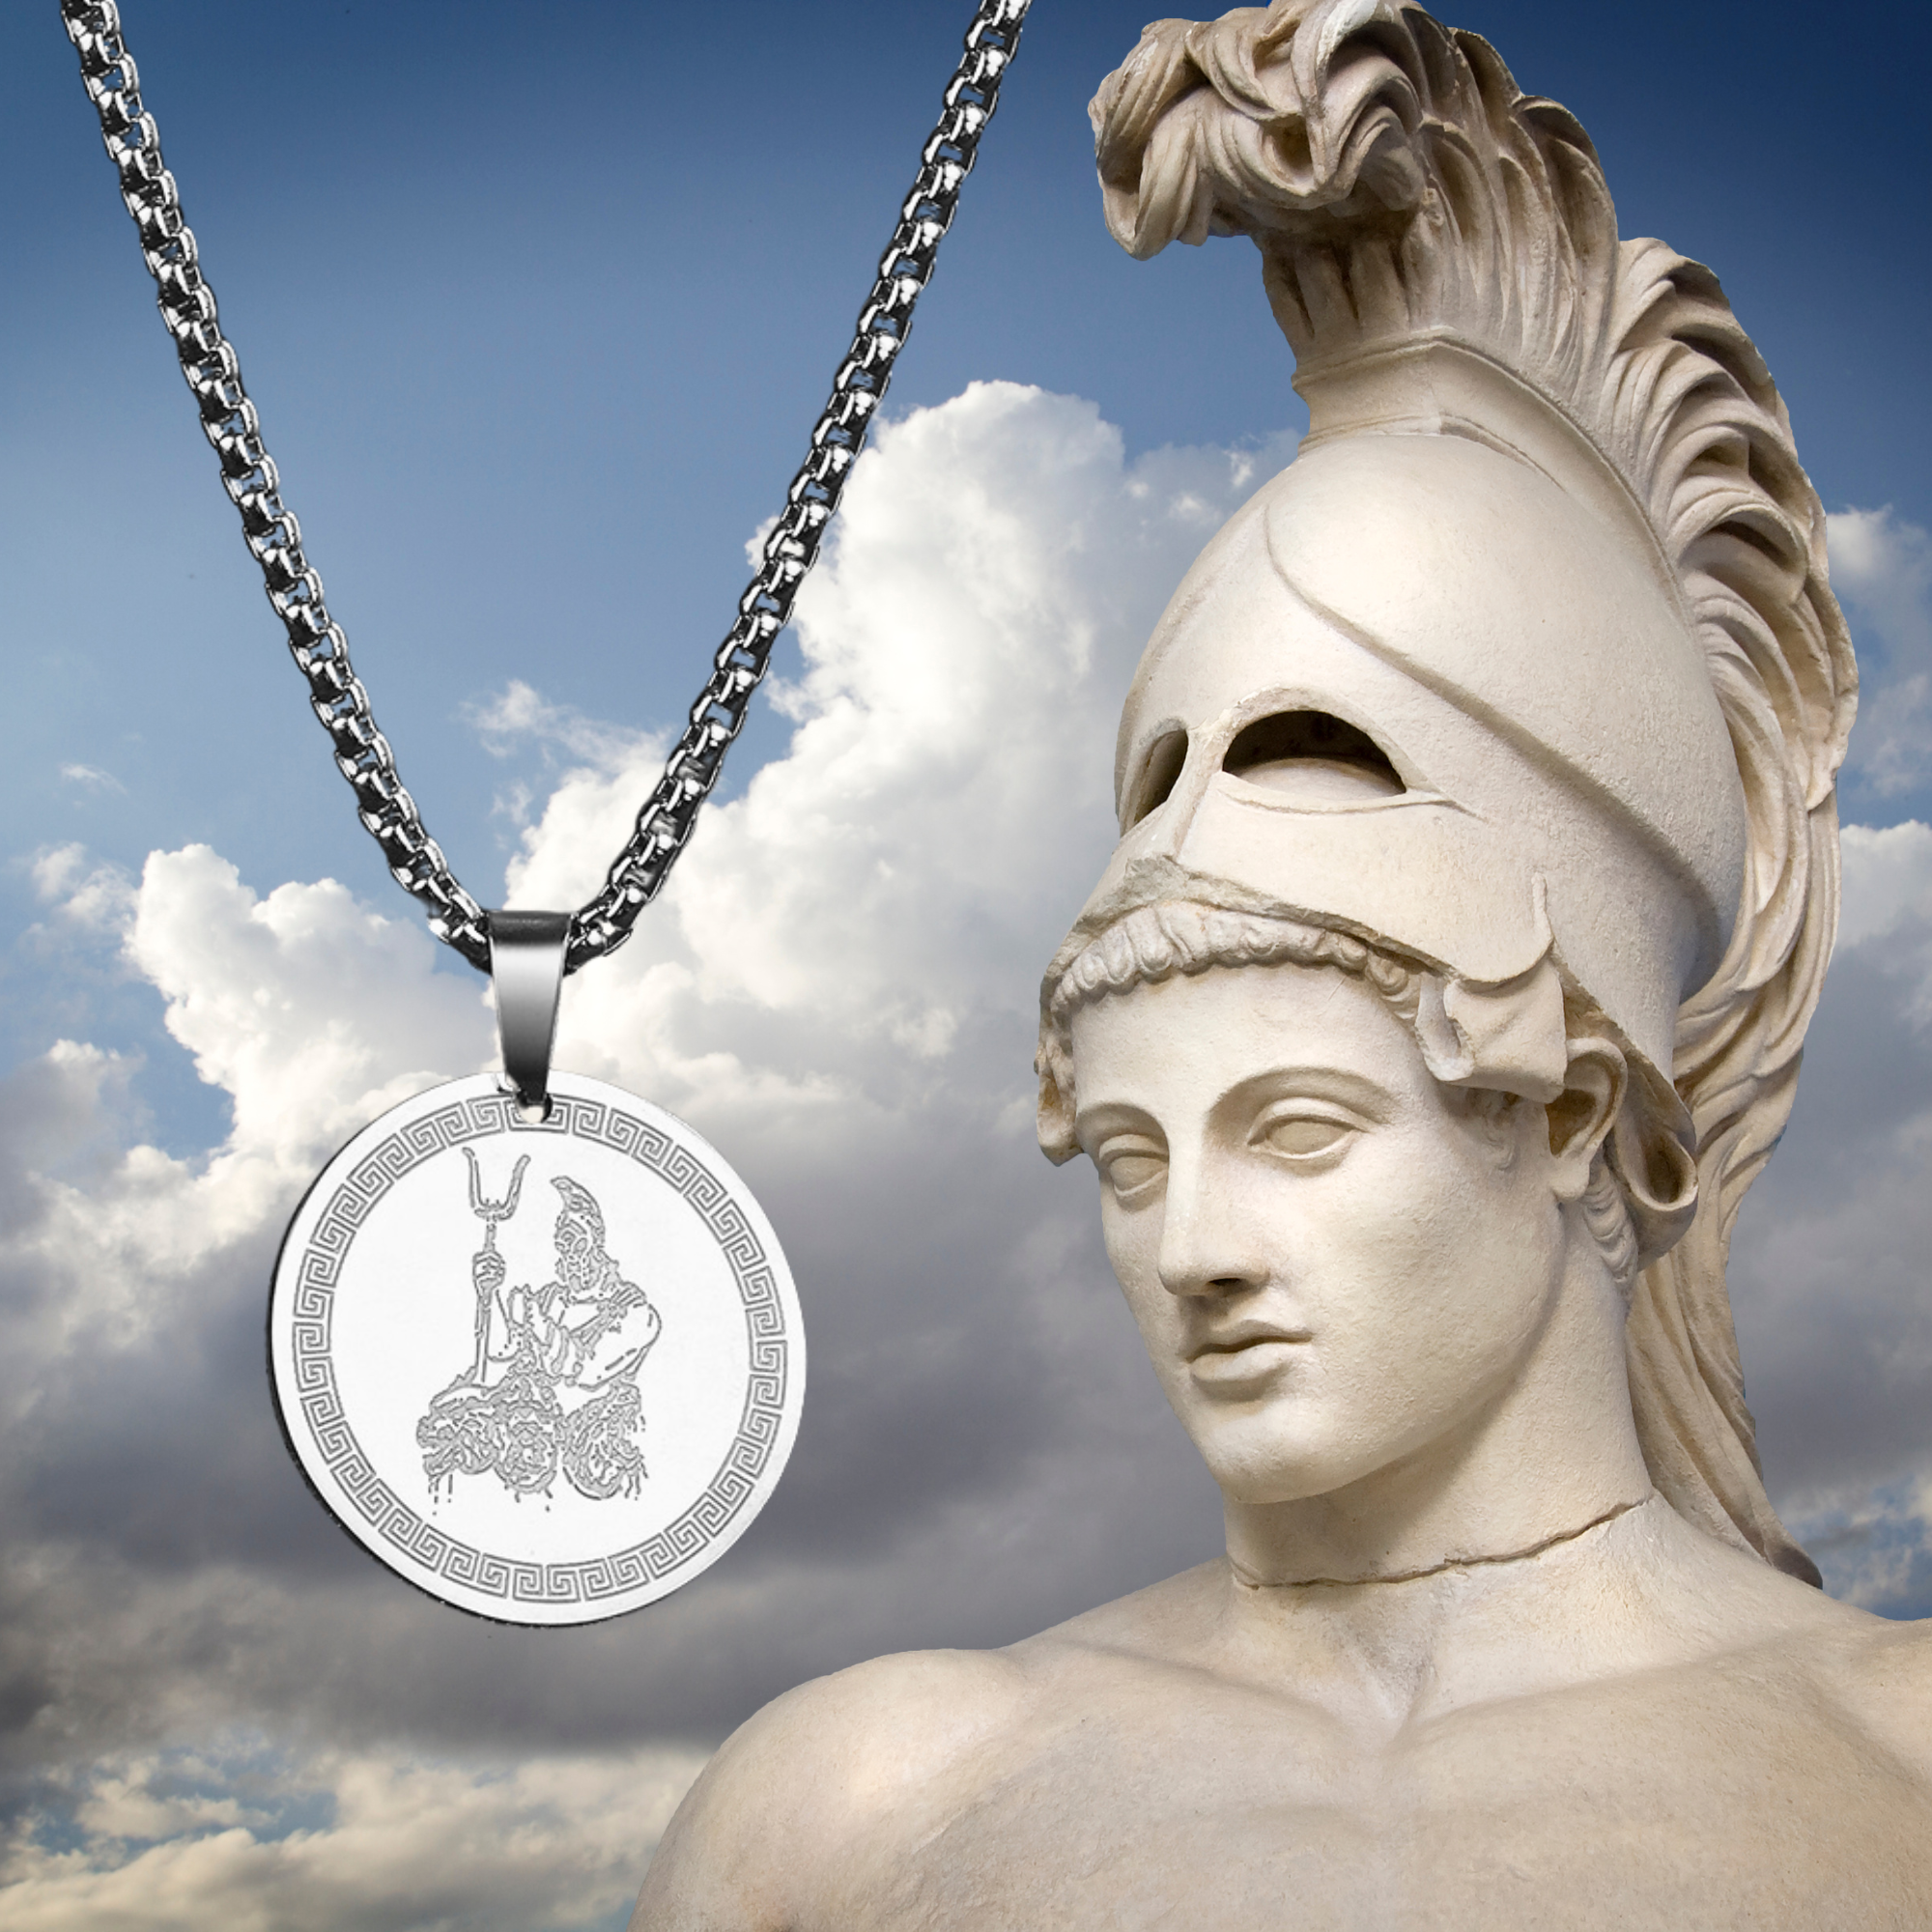 Hades & Cerberus Greek Mythology Necklace | Chthonic God Of The Underworld Pendant | Silver Or Gold-Plated Stainless Steel Charm Jewelry | Apollo Tarot Shop